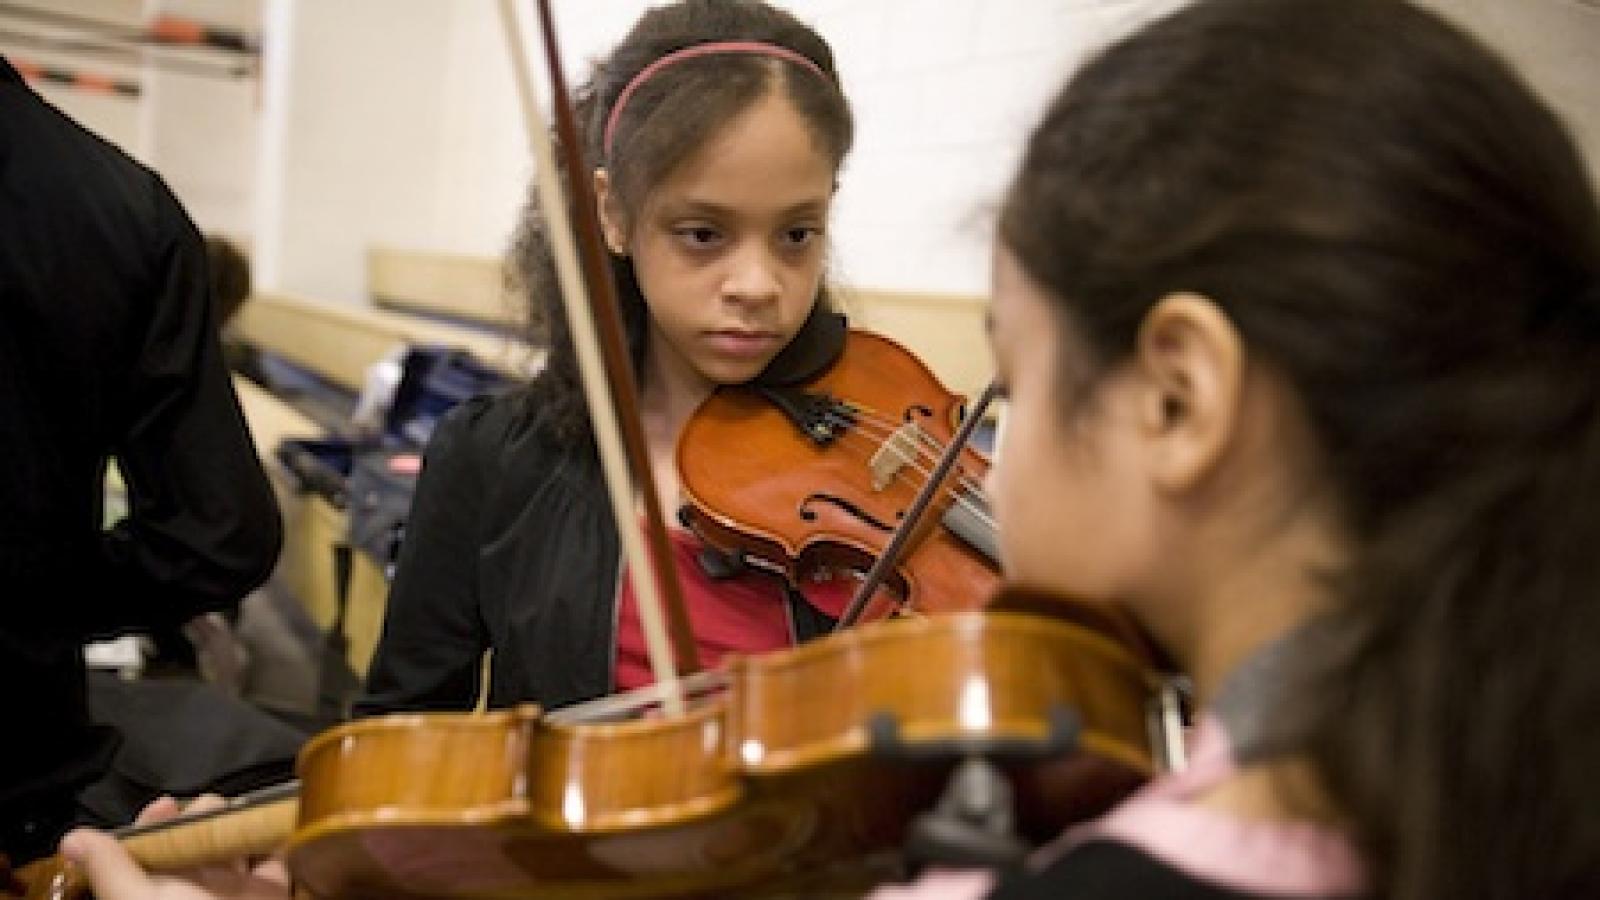 Students receiving instruction at Community MusicWorks in Providence, Rhode Island. Photo by Jori Ketten